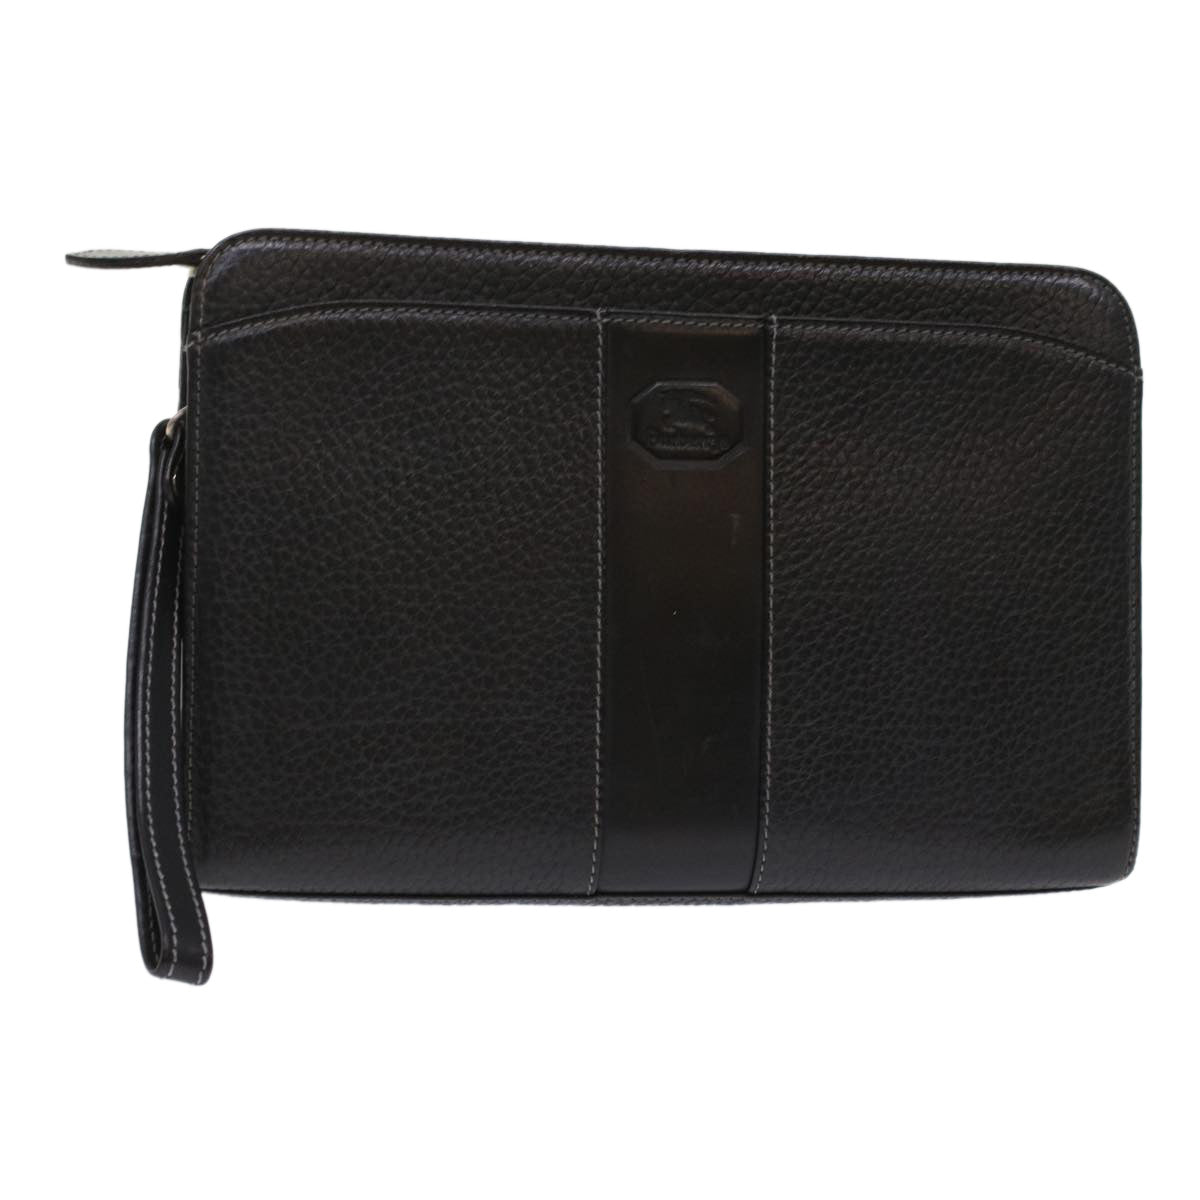 Burberrys Clutch Bag Leather Black Auth bs7004